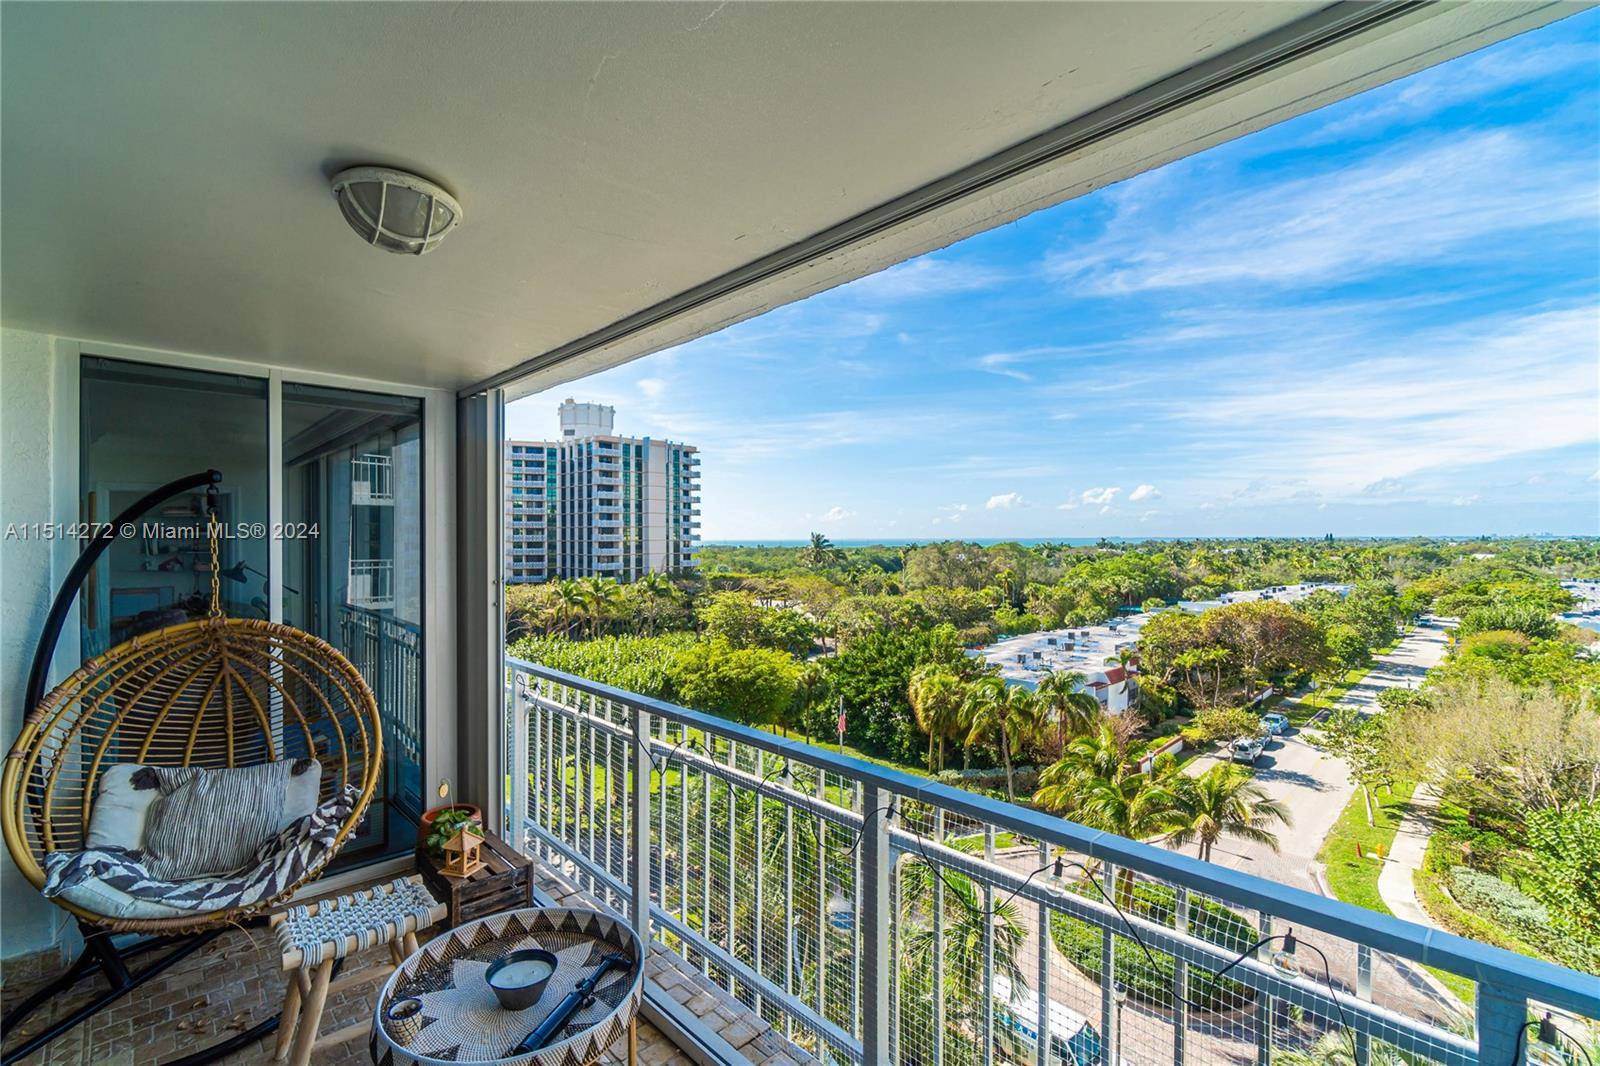 Unique opportunity at Mar Azul 2Bed 3Bath condo with an additional space with closet for a flexible room den office.